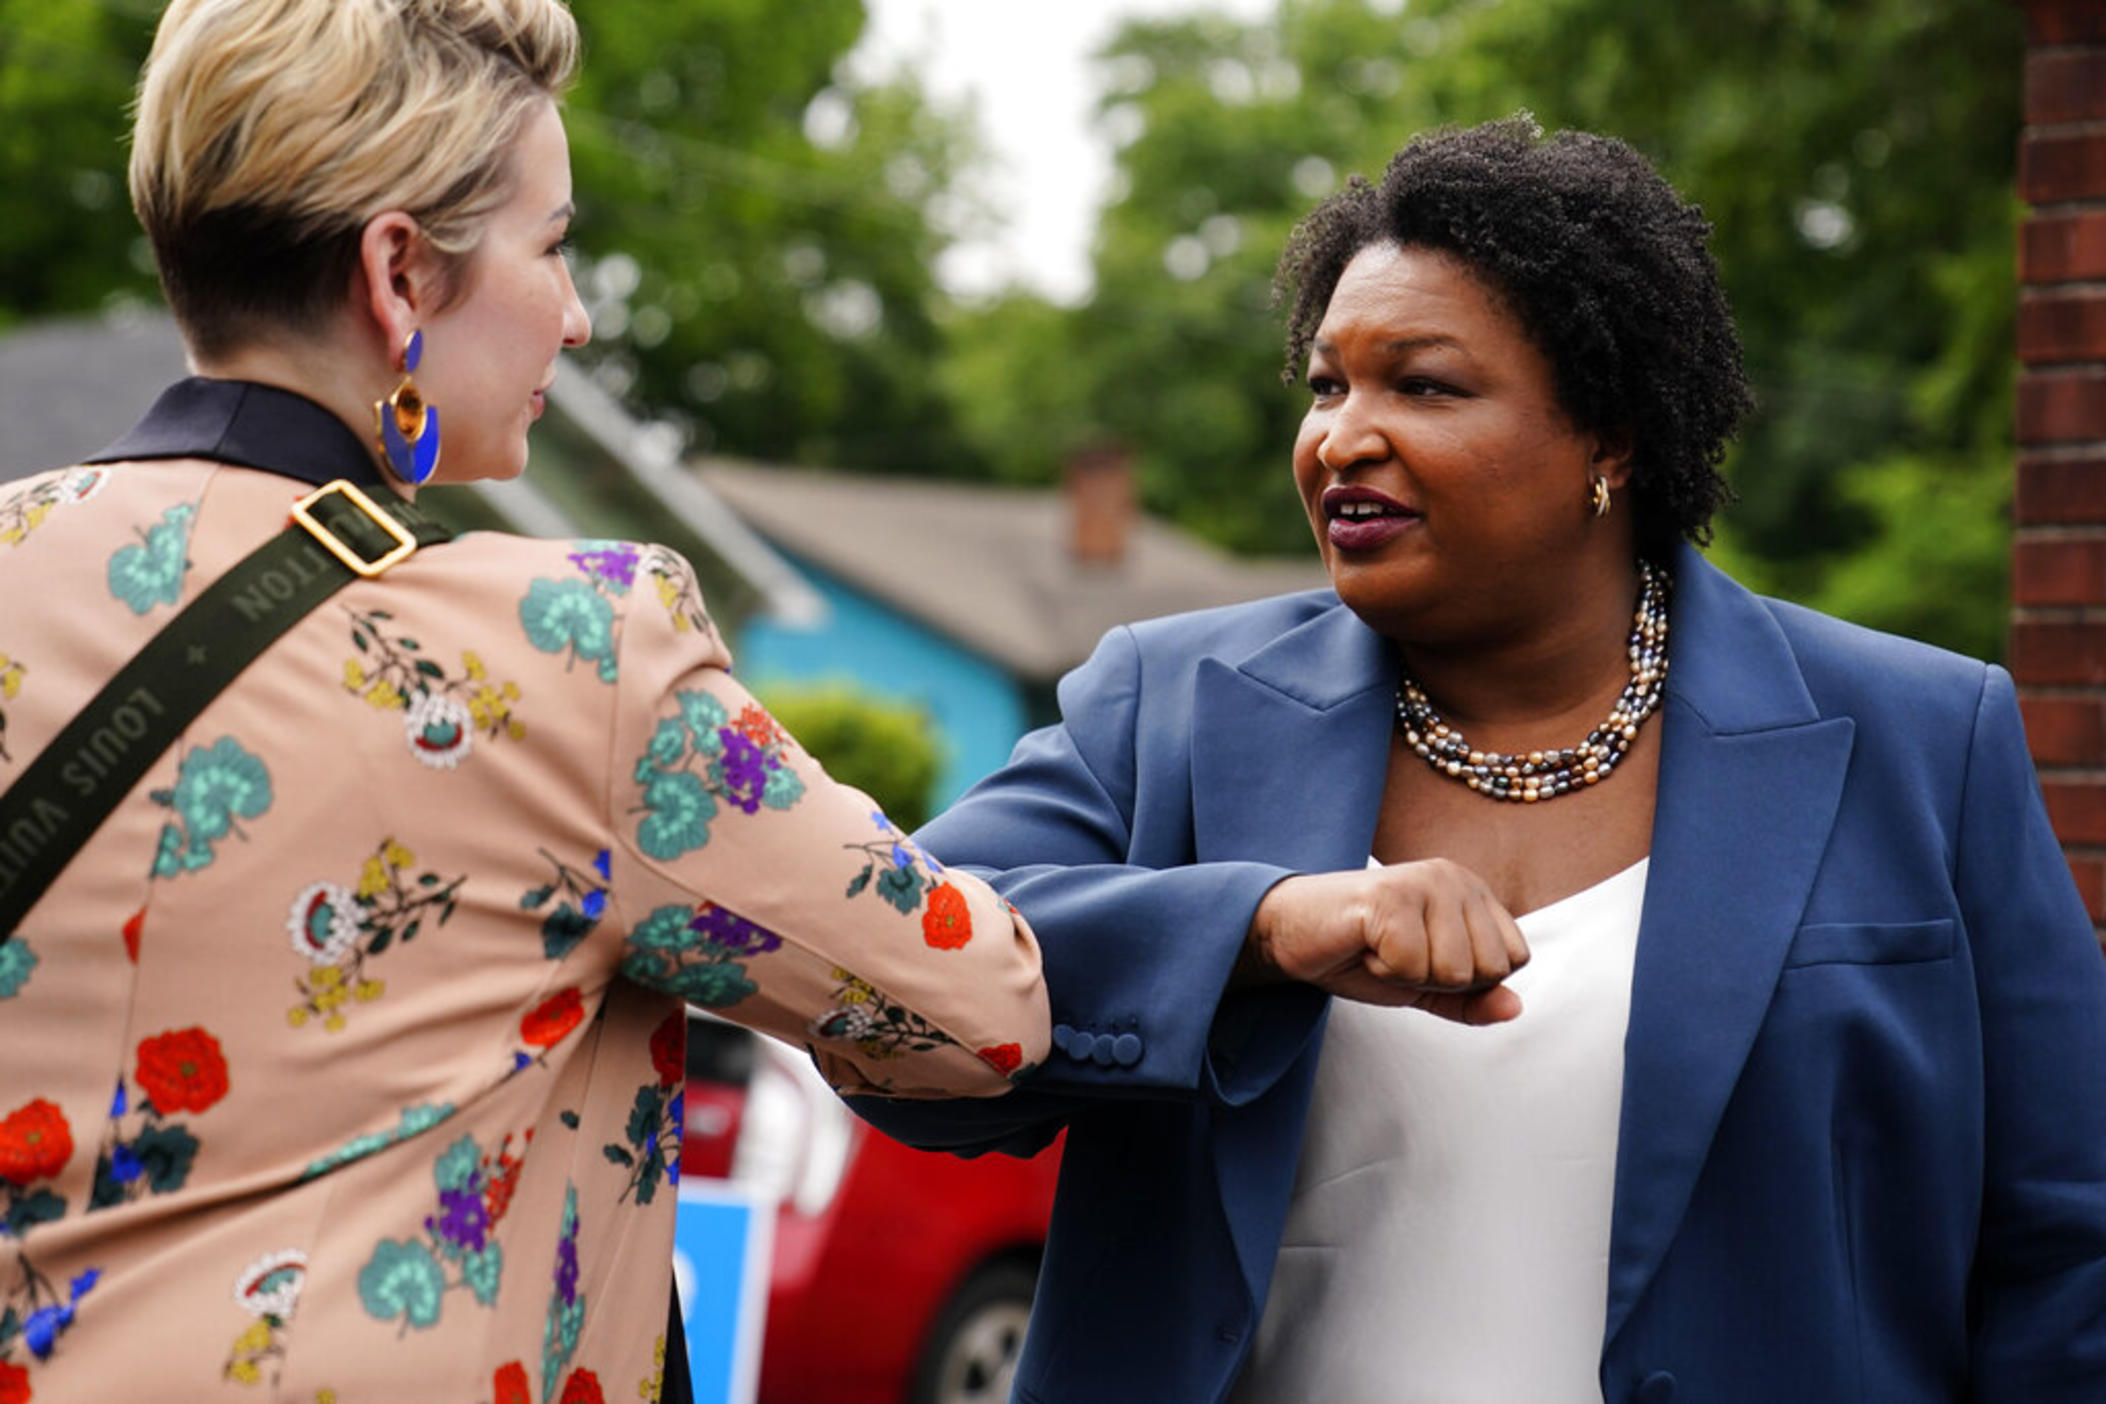 Georgia Democratic gubernatorial candidate Stacey Abrams greets a supporter May 24, 2022, in Atlanta. Georgia Gov. Abrams is launching an intensive effort to get out the vote by urging potential supporters to cast in-person ballots the first week of early voting as she tries to navigate the state’s new election laws.